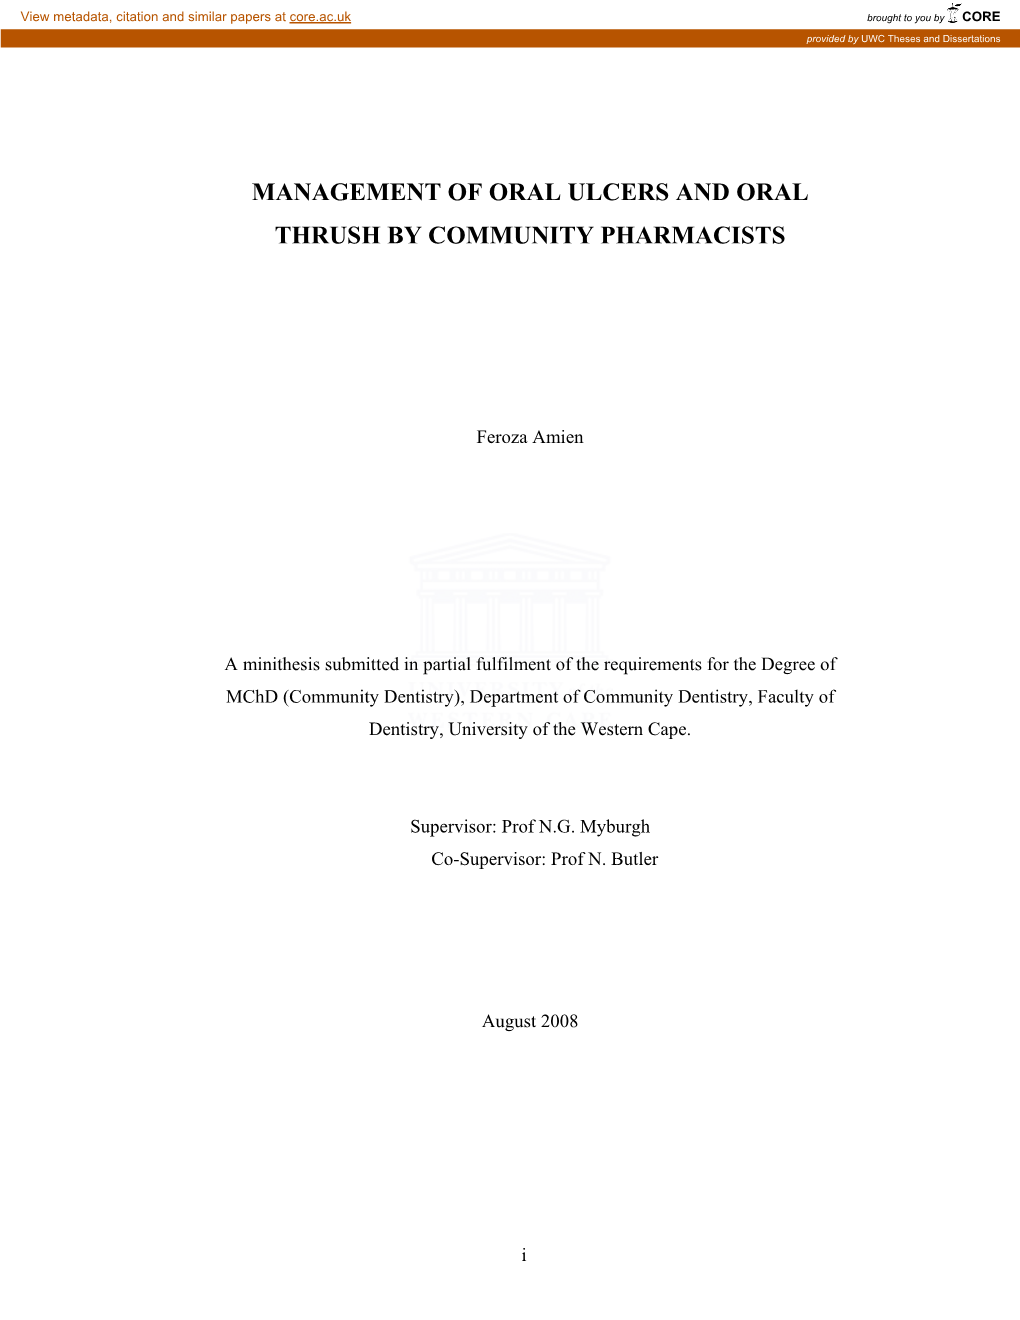 Management of Oral Ulcers and Oral Thrush by Community Pharmacists F